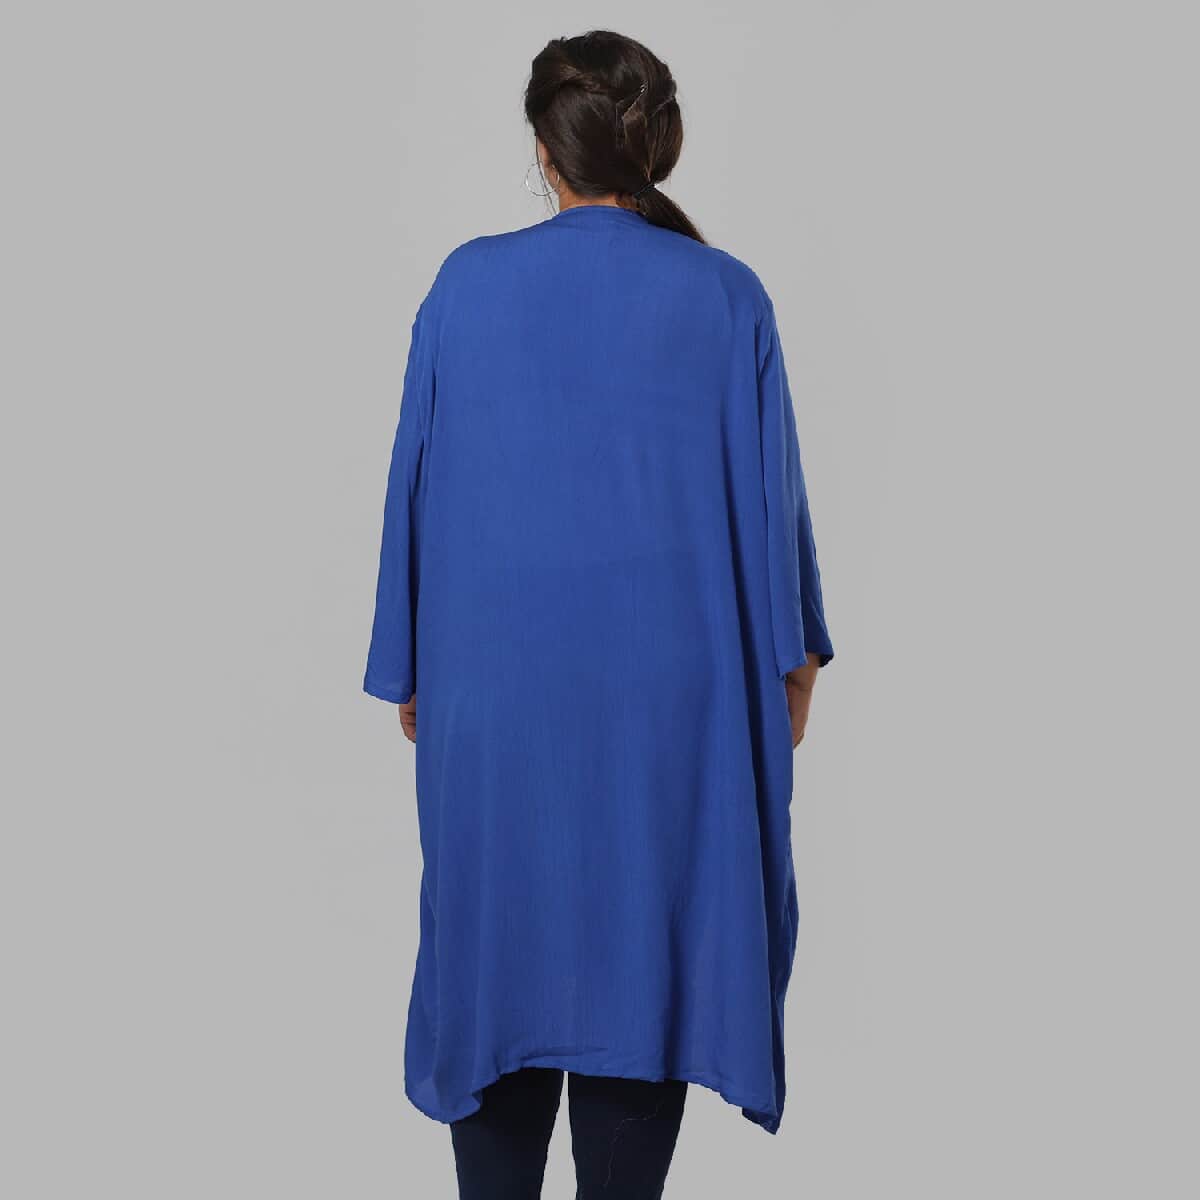 Blue Tie Dye Kimono Duster with Bell Sleeves - One Size Fits Most image number 2